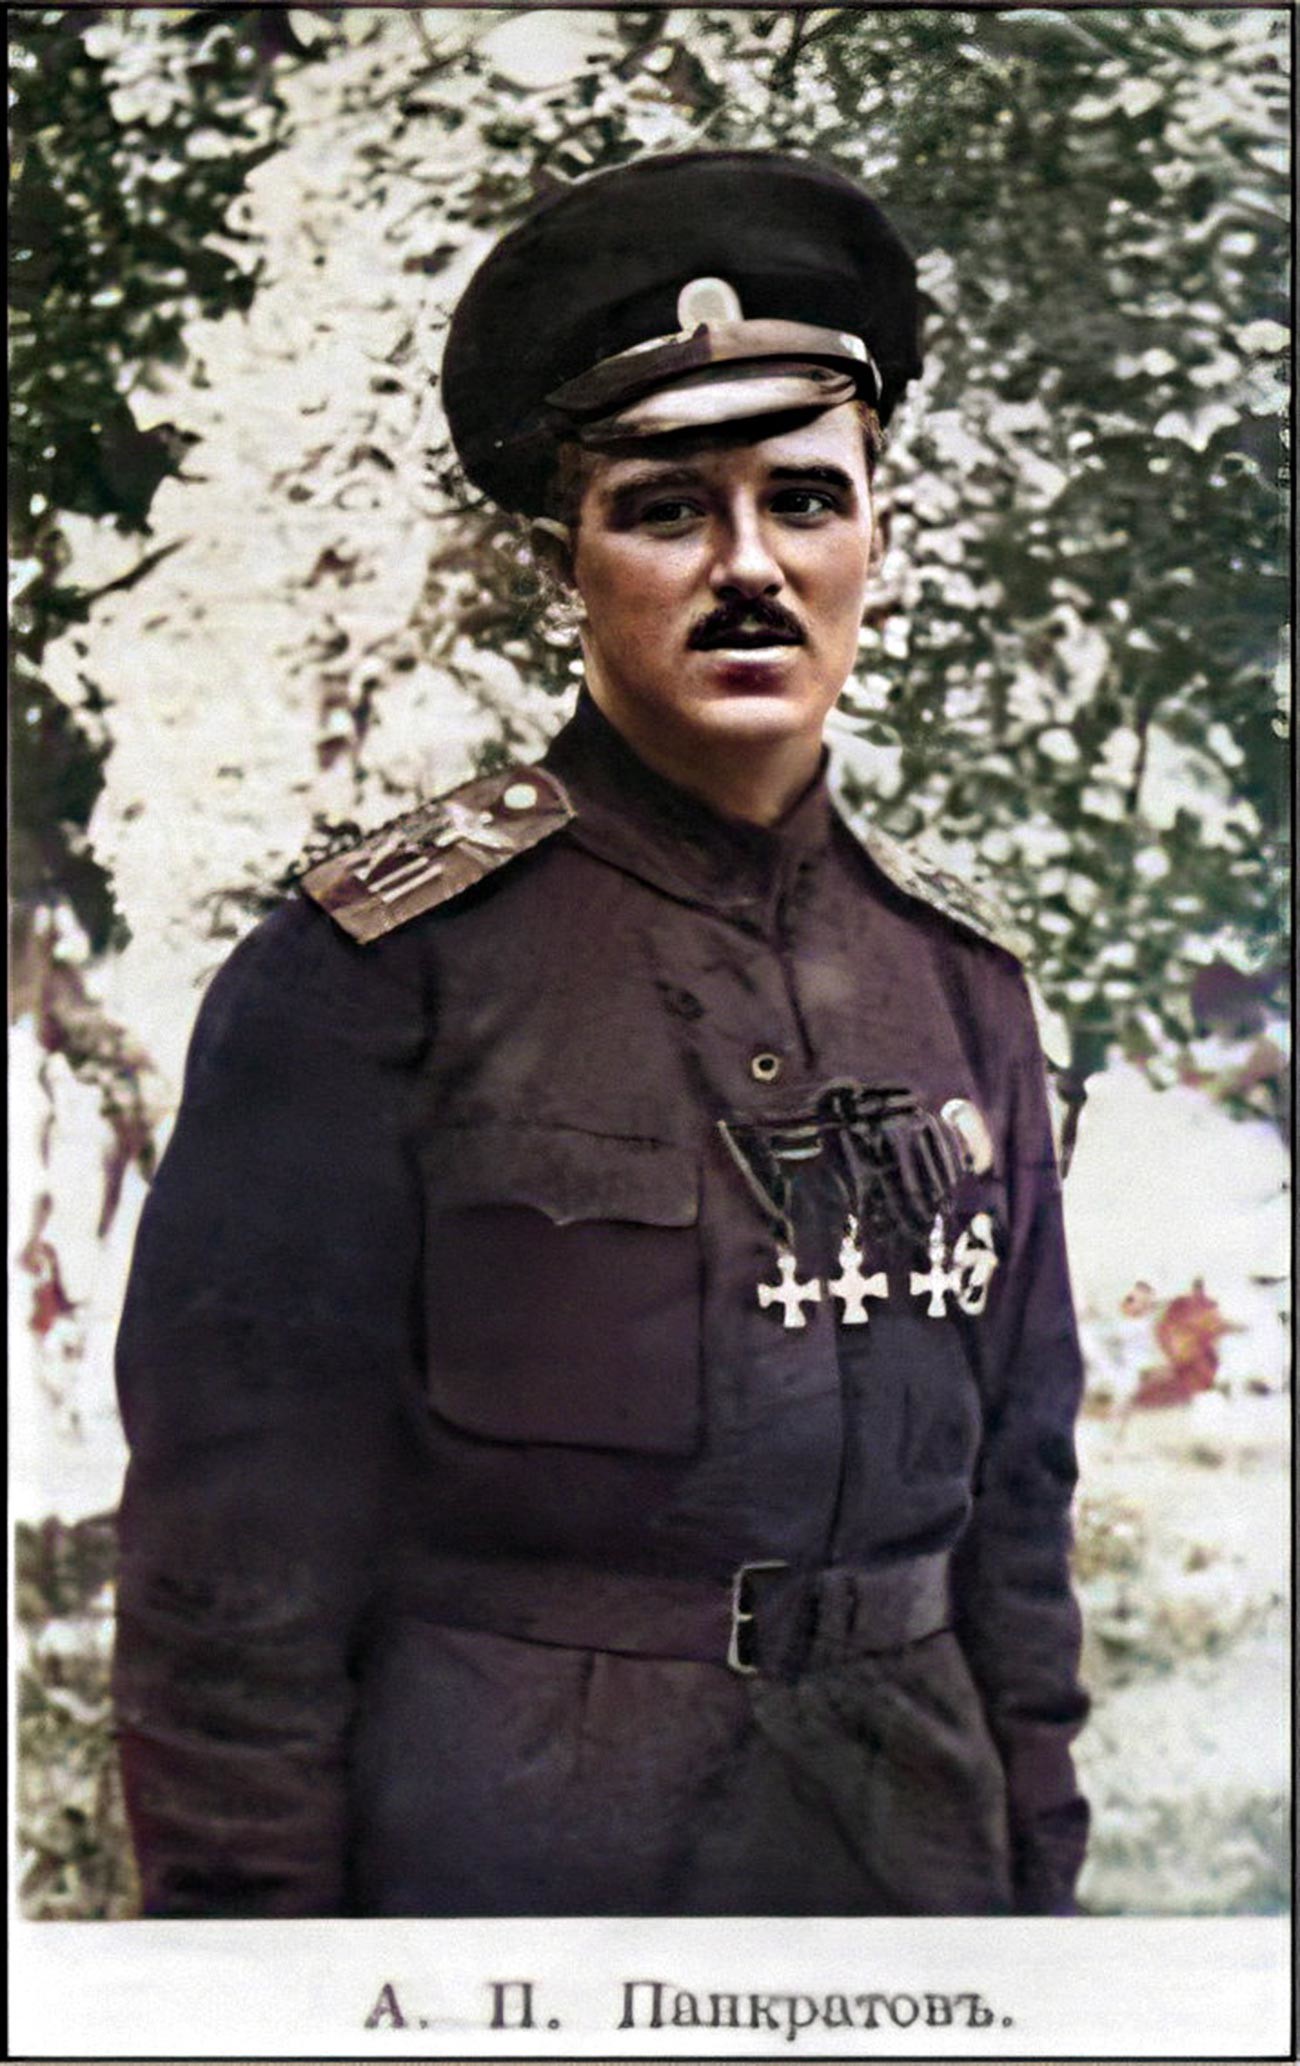 Onisim Pankratov in the uniform of the 12th Corps Air Detachment, with all three St. George crosses